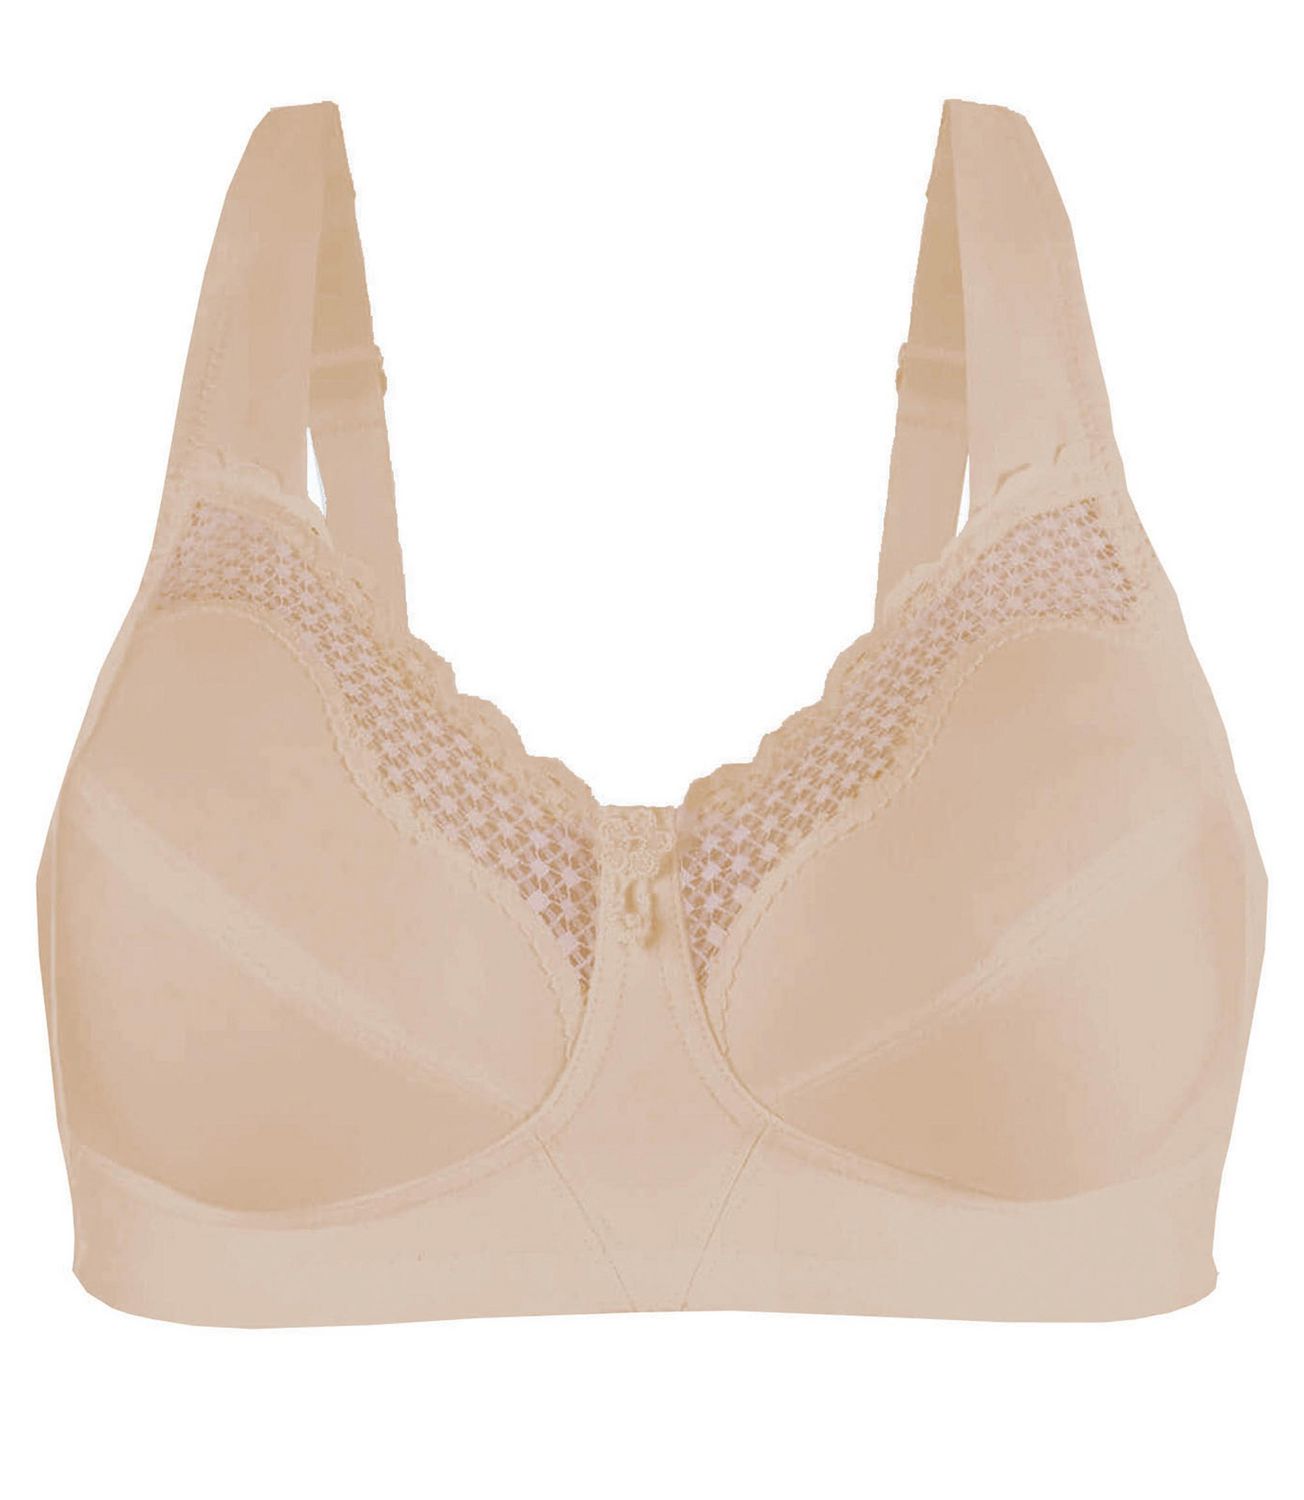 Buy POOJARAGENEE Full Coverage Non Padded Soft Cotton Mold Bra for Everyday  at